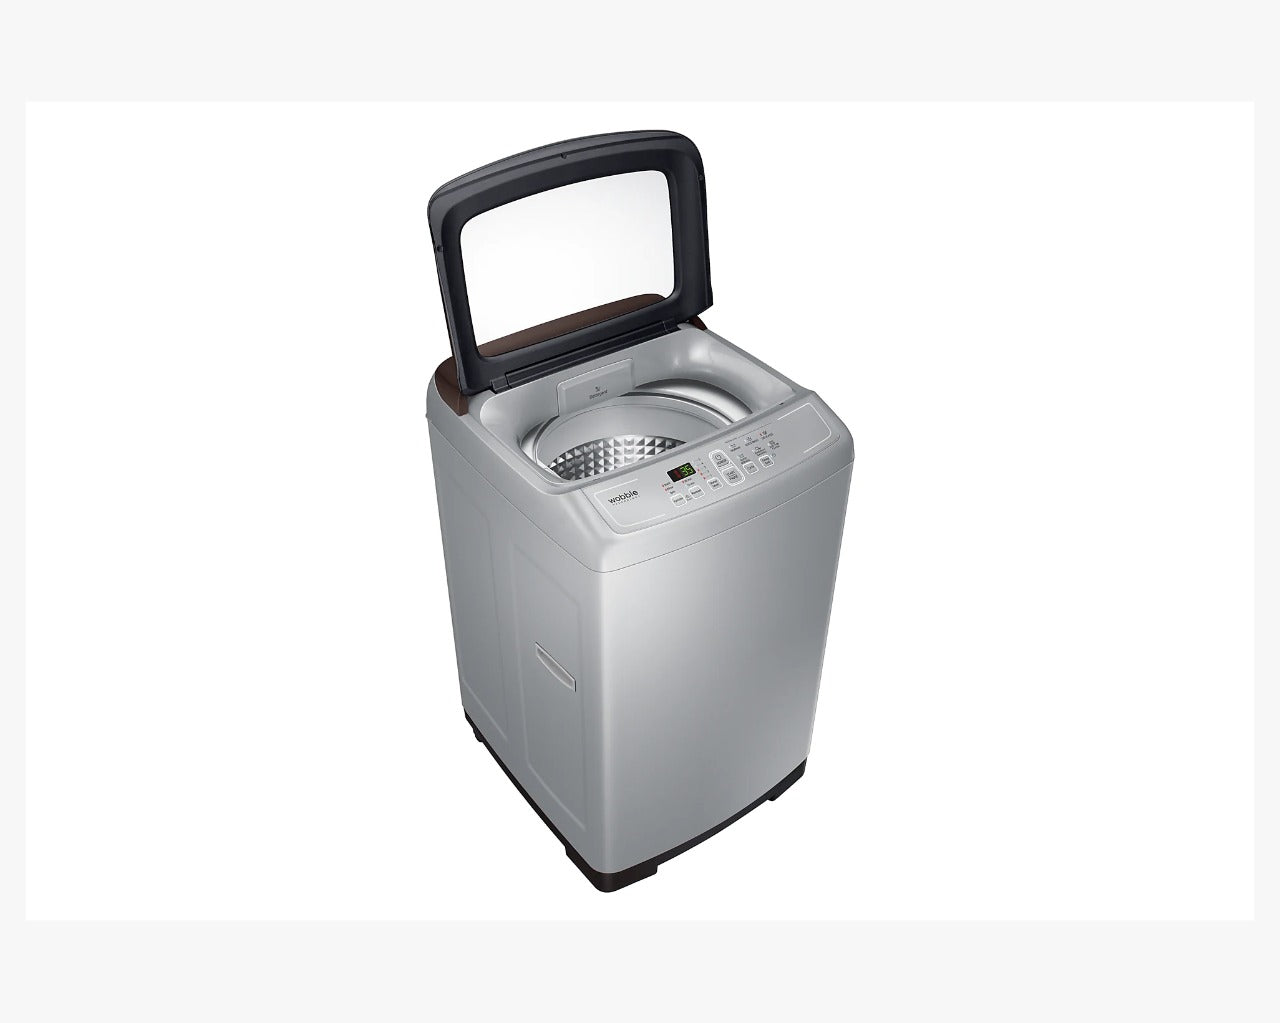 Samsung WA65A4022NS Top Loading with Wobble Technology 6.5Kg